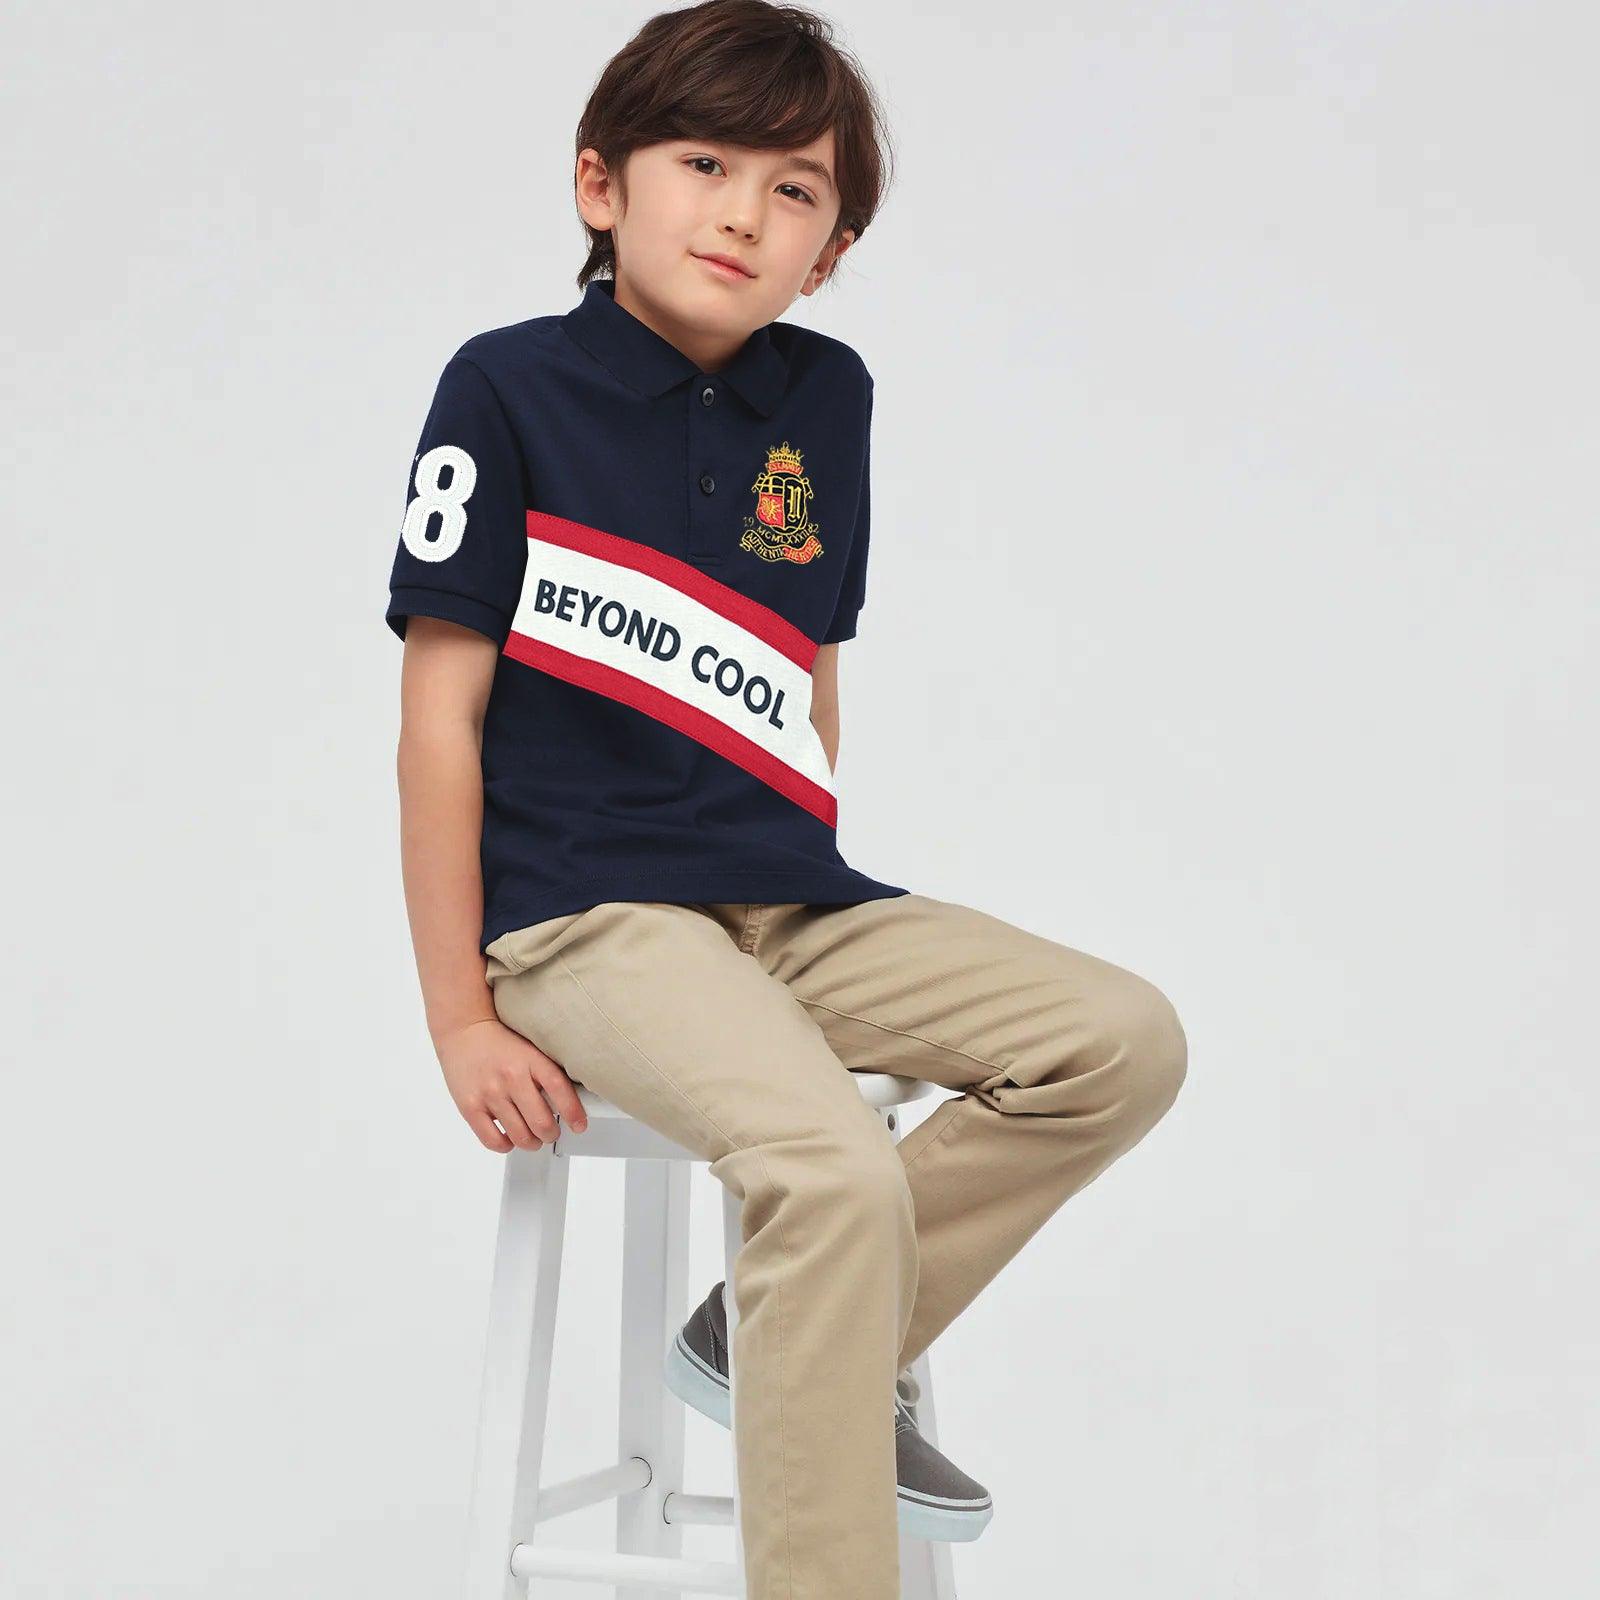 Boy's Fashion Embroidered Pique Polo Shirt 9-12 MONTH - 10 YRS - Brands River